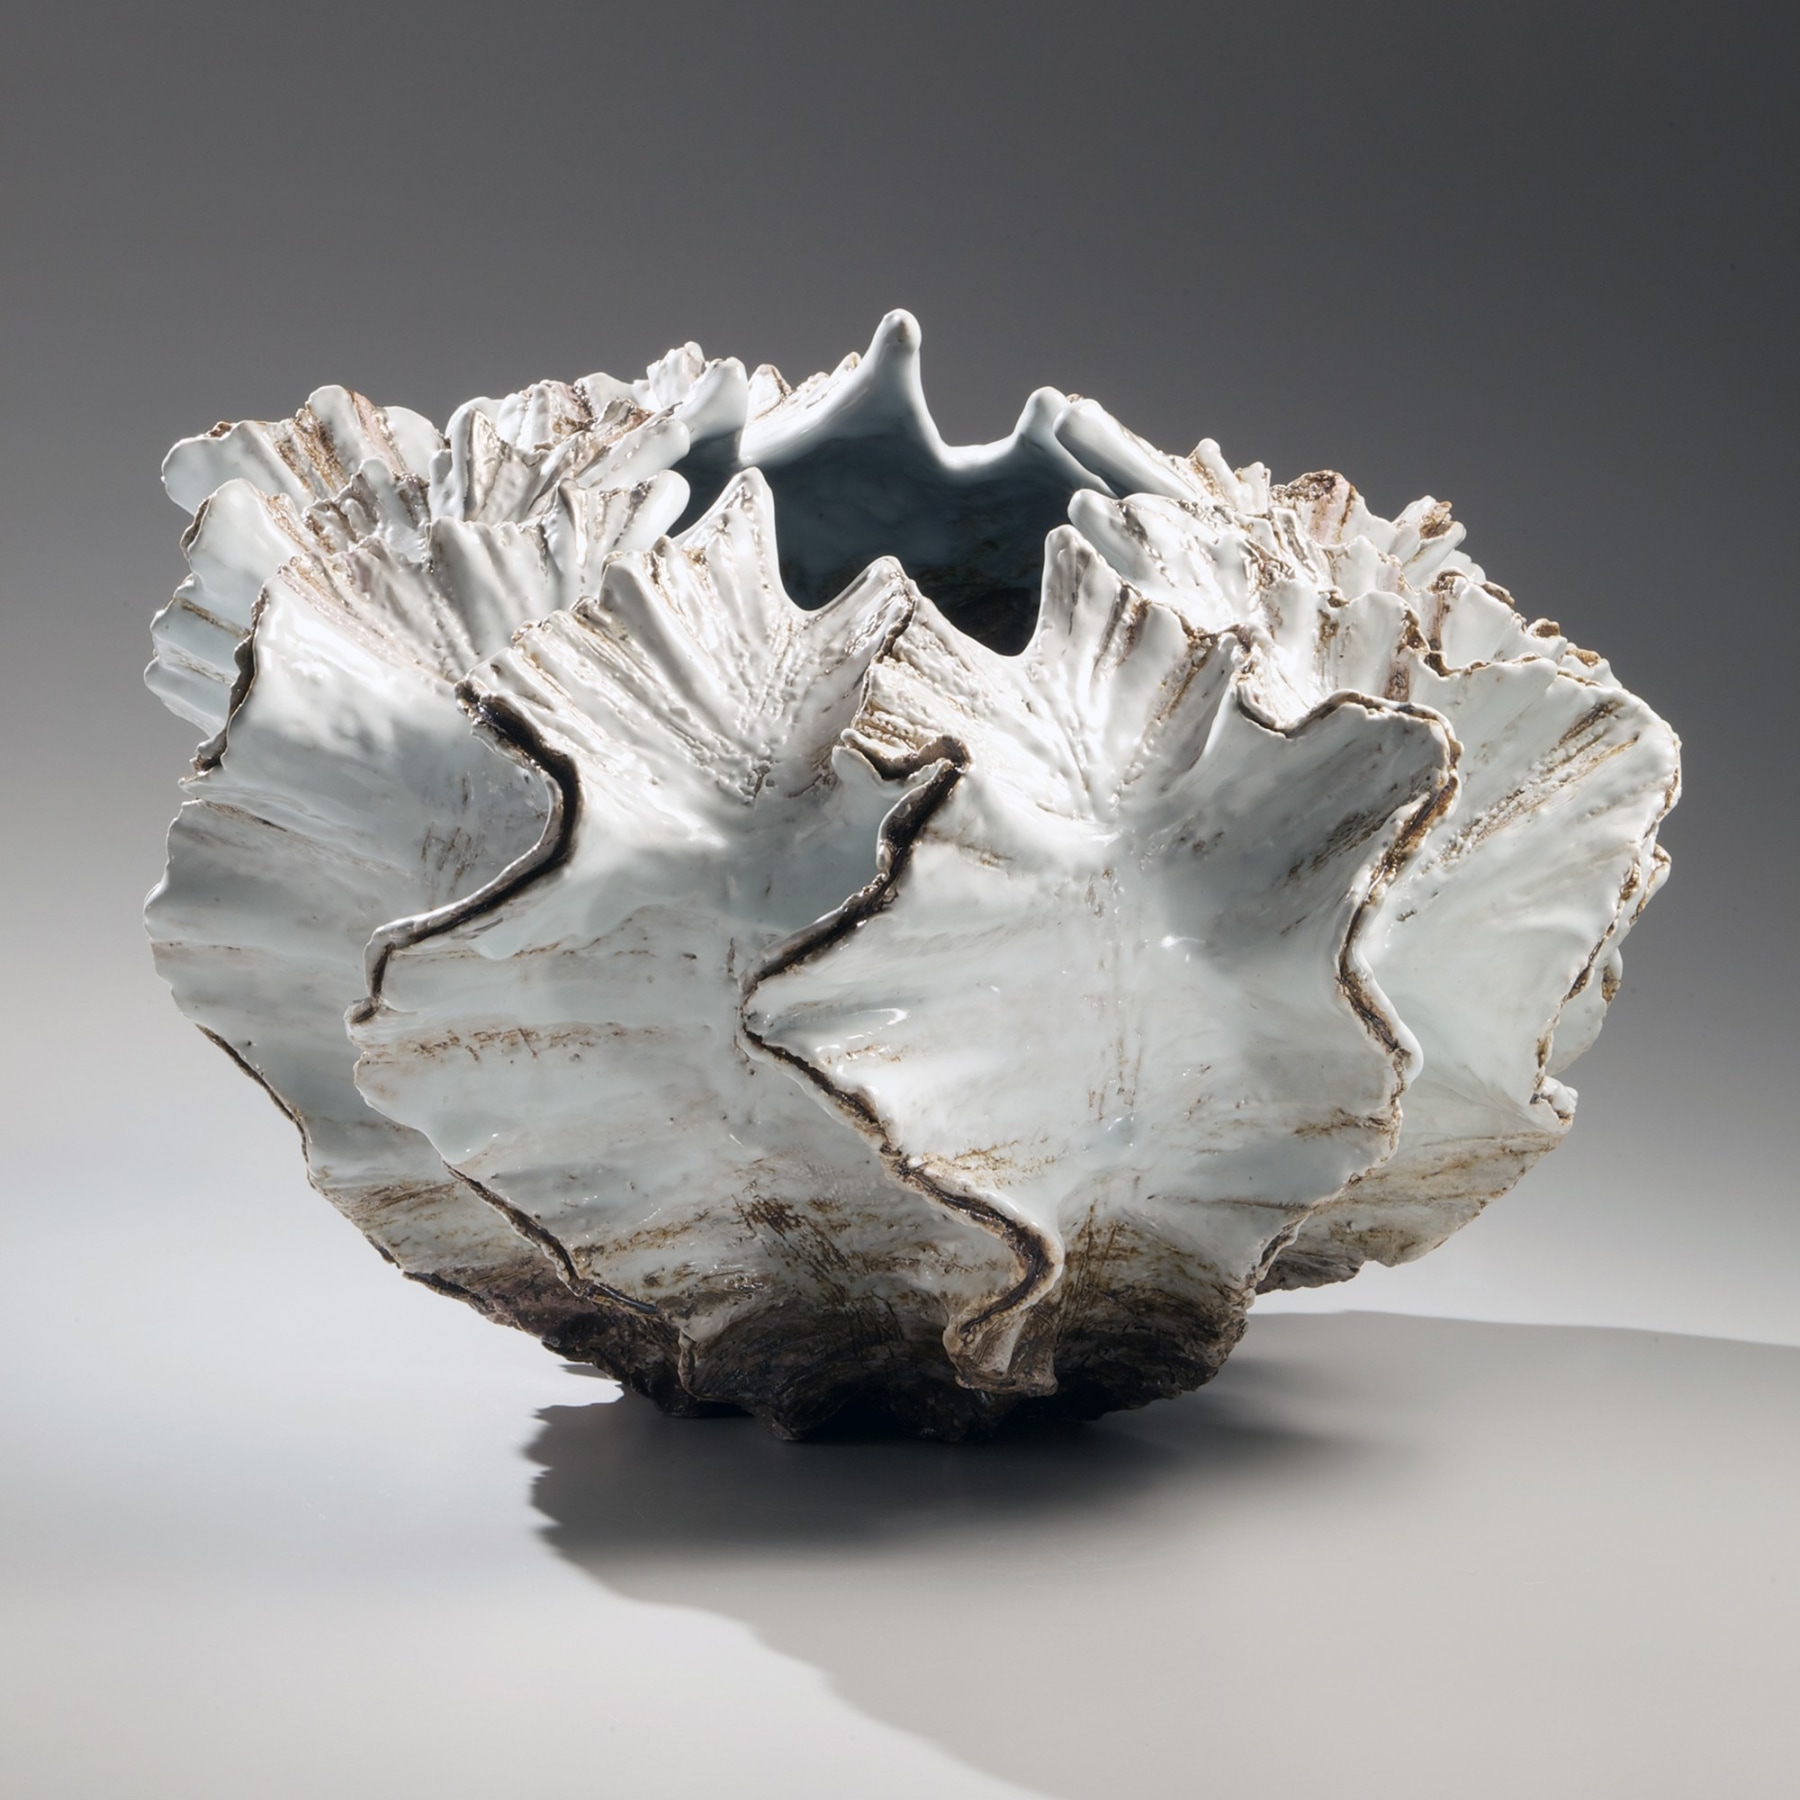 Pleated shell-shaped sculpture with silver glaze along the flaring edges, turquoise and white glazed interior and narrow mouth, 2012